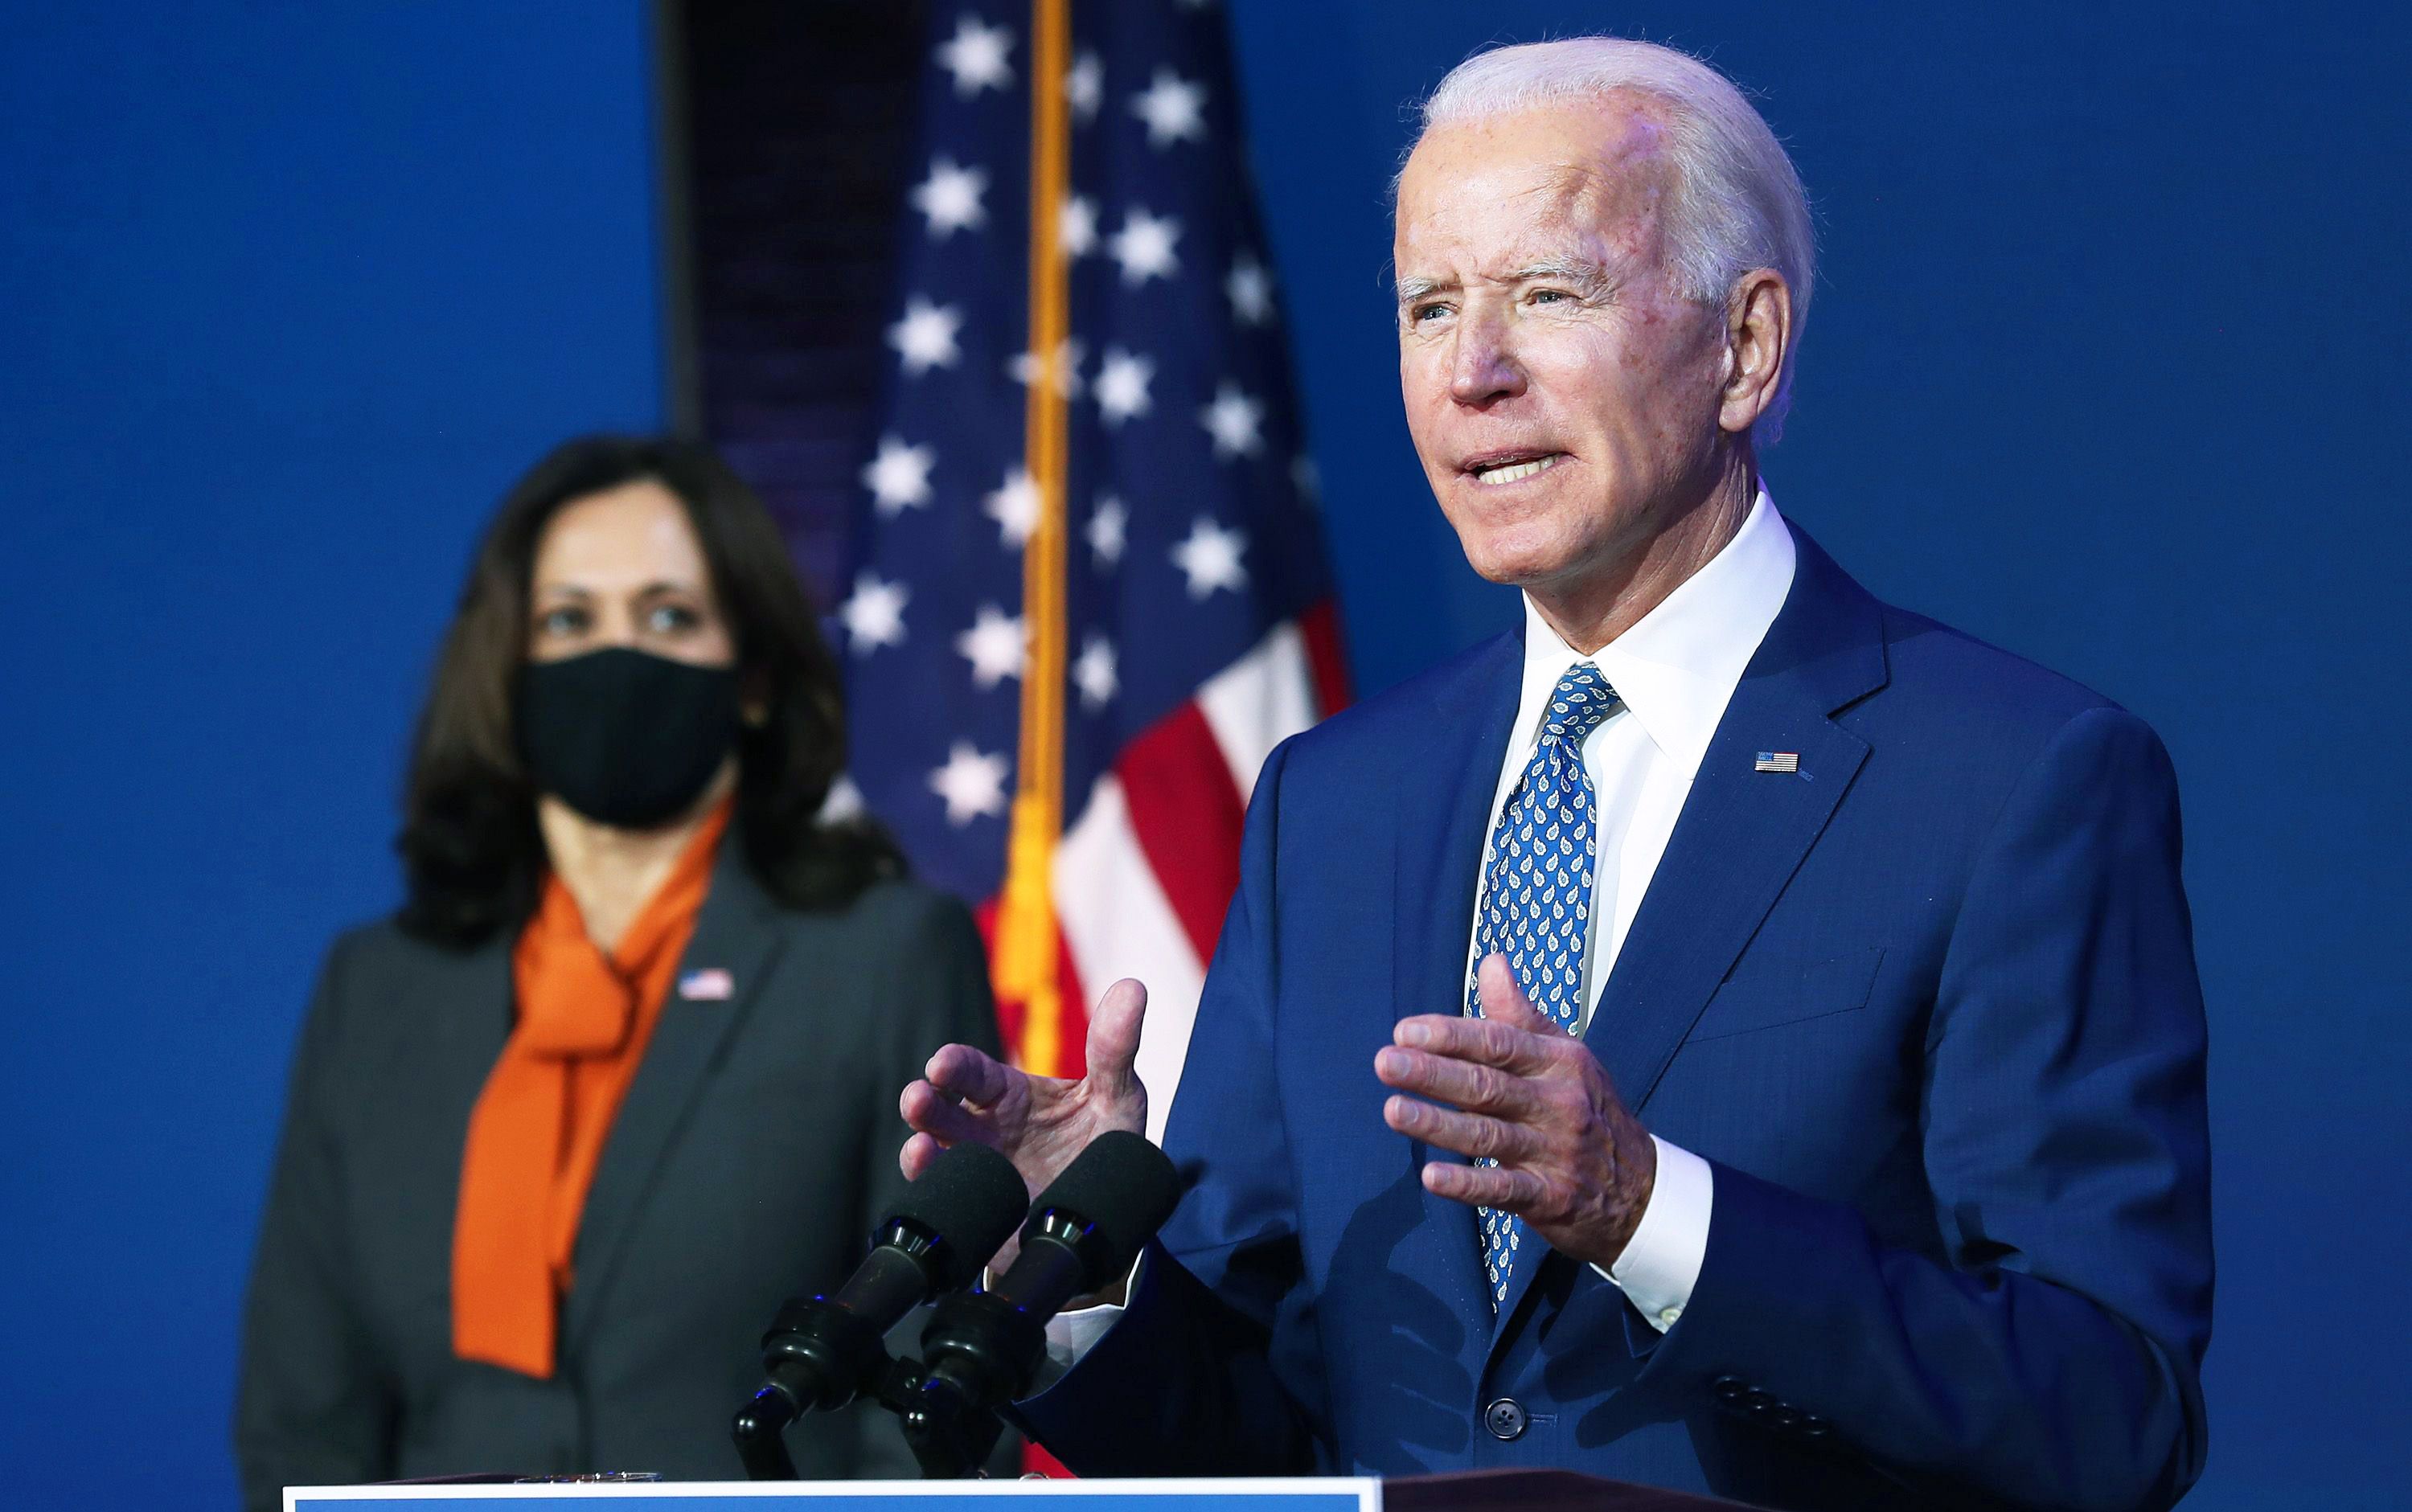 Confusion as Biden ends speech with ‘God save the queen, man’